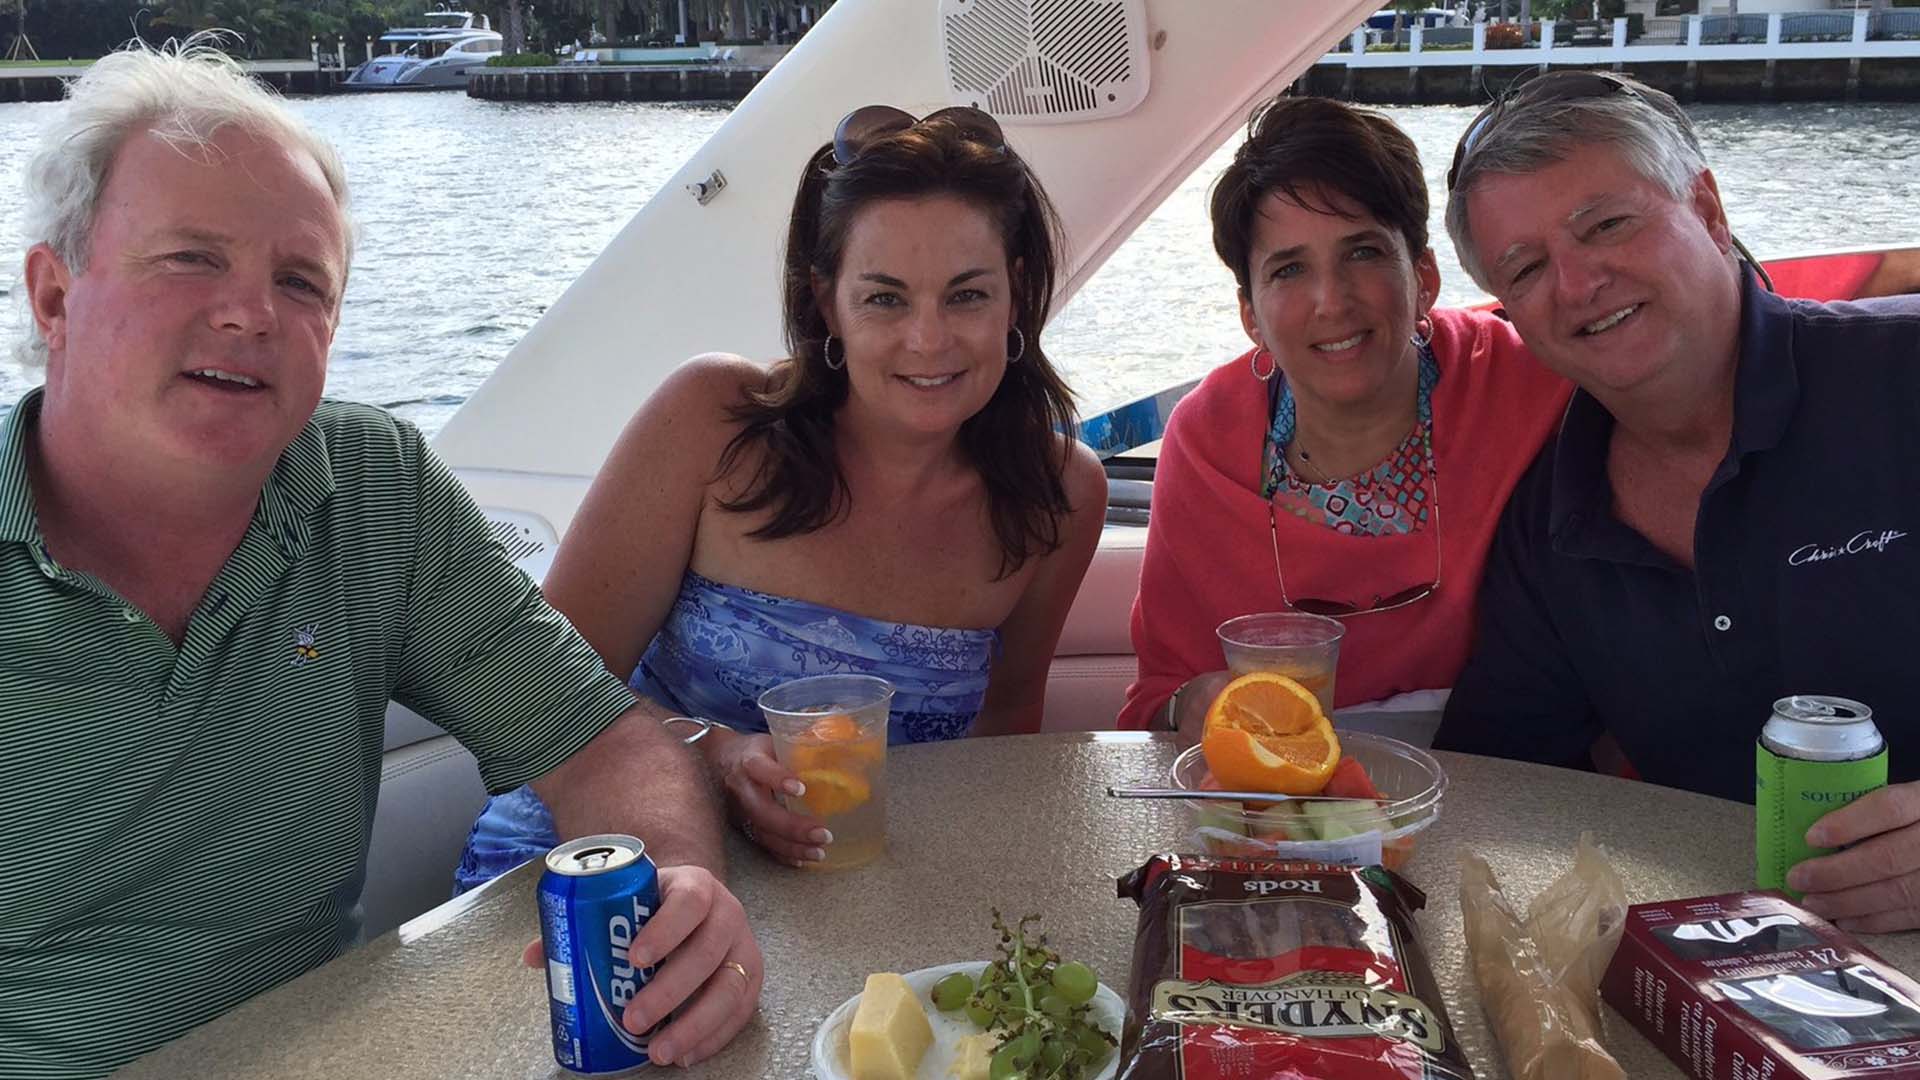 Mature Adults Enjoying Themselves on a Yacht